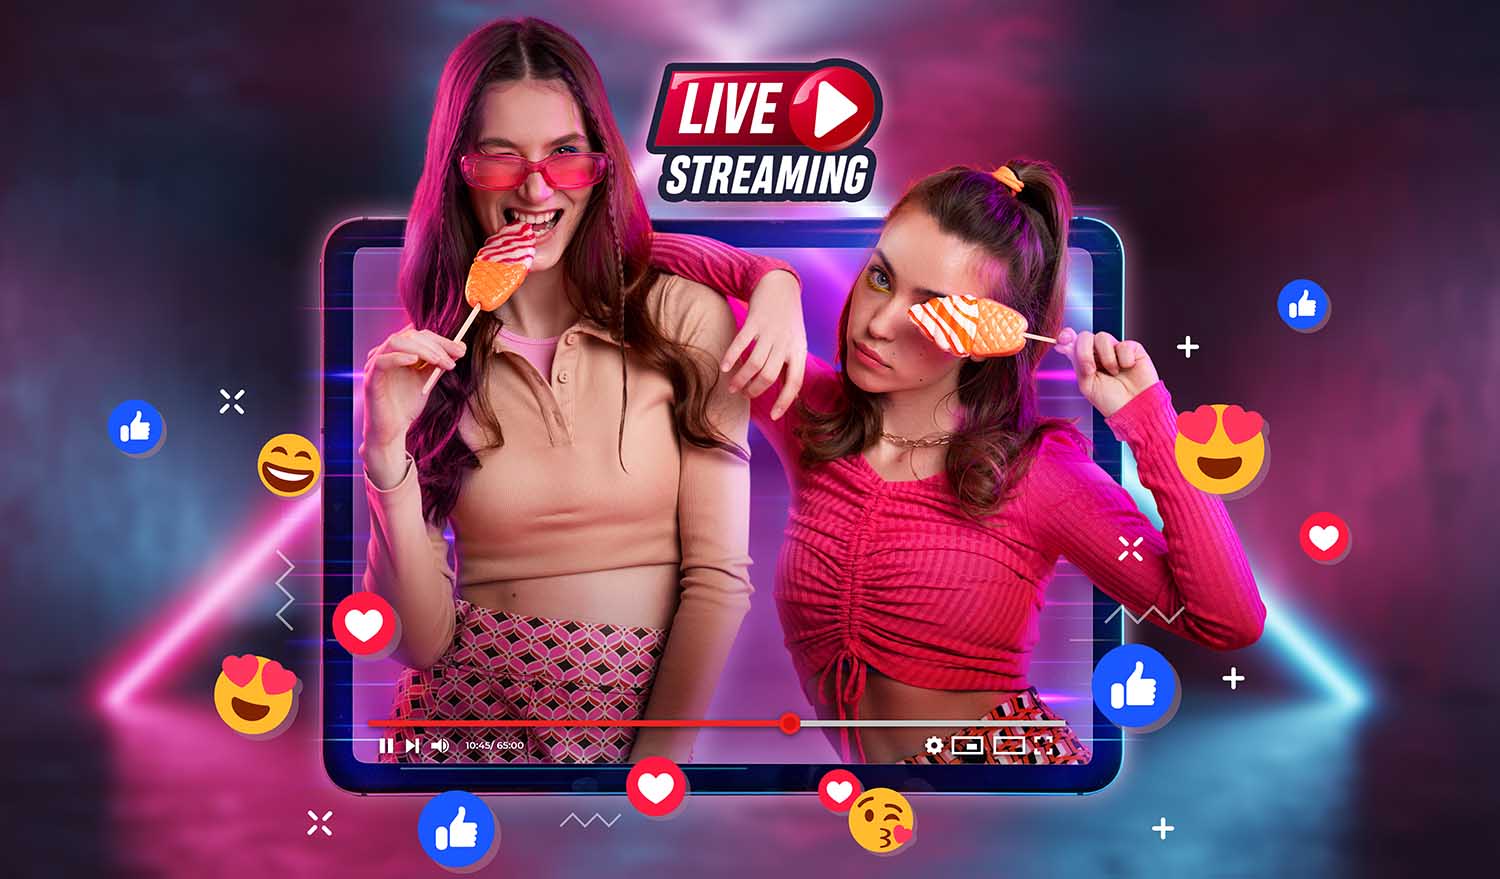 The increasing popularity of live streaming